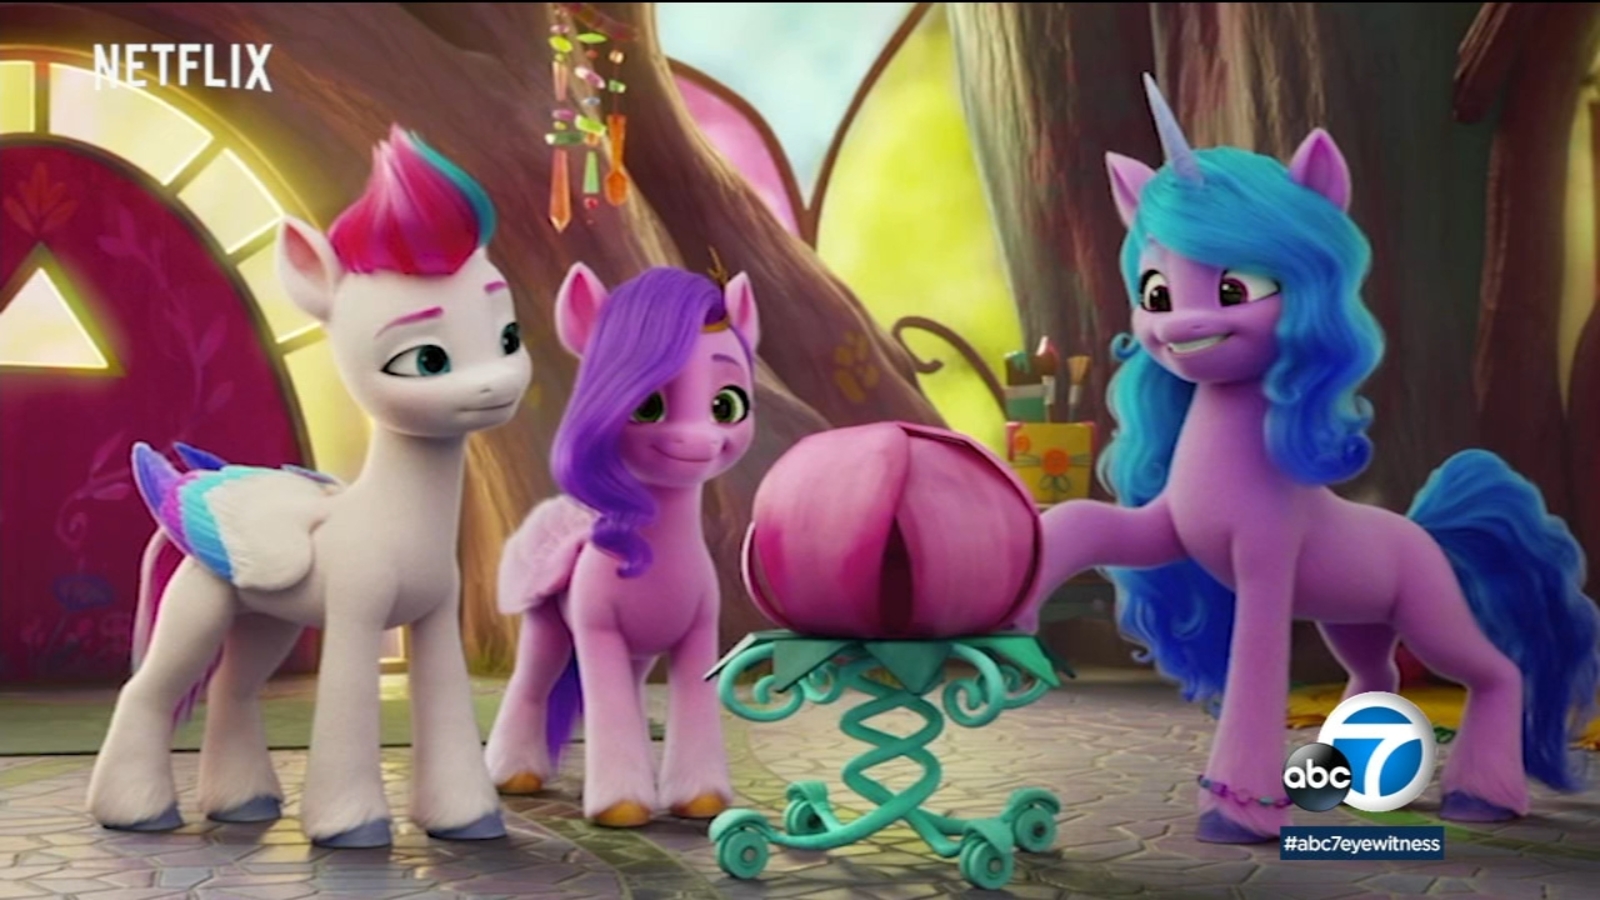 Vanessa Hudgens, Sofia Carson, James Marsden bring story of inclusion to kids in music filled 'My Little Pony:The Next Generation' Los Angeles